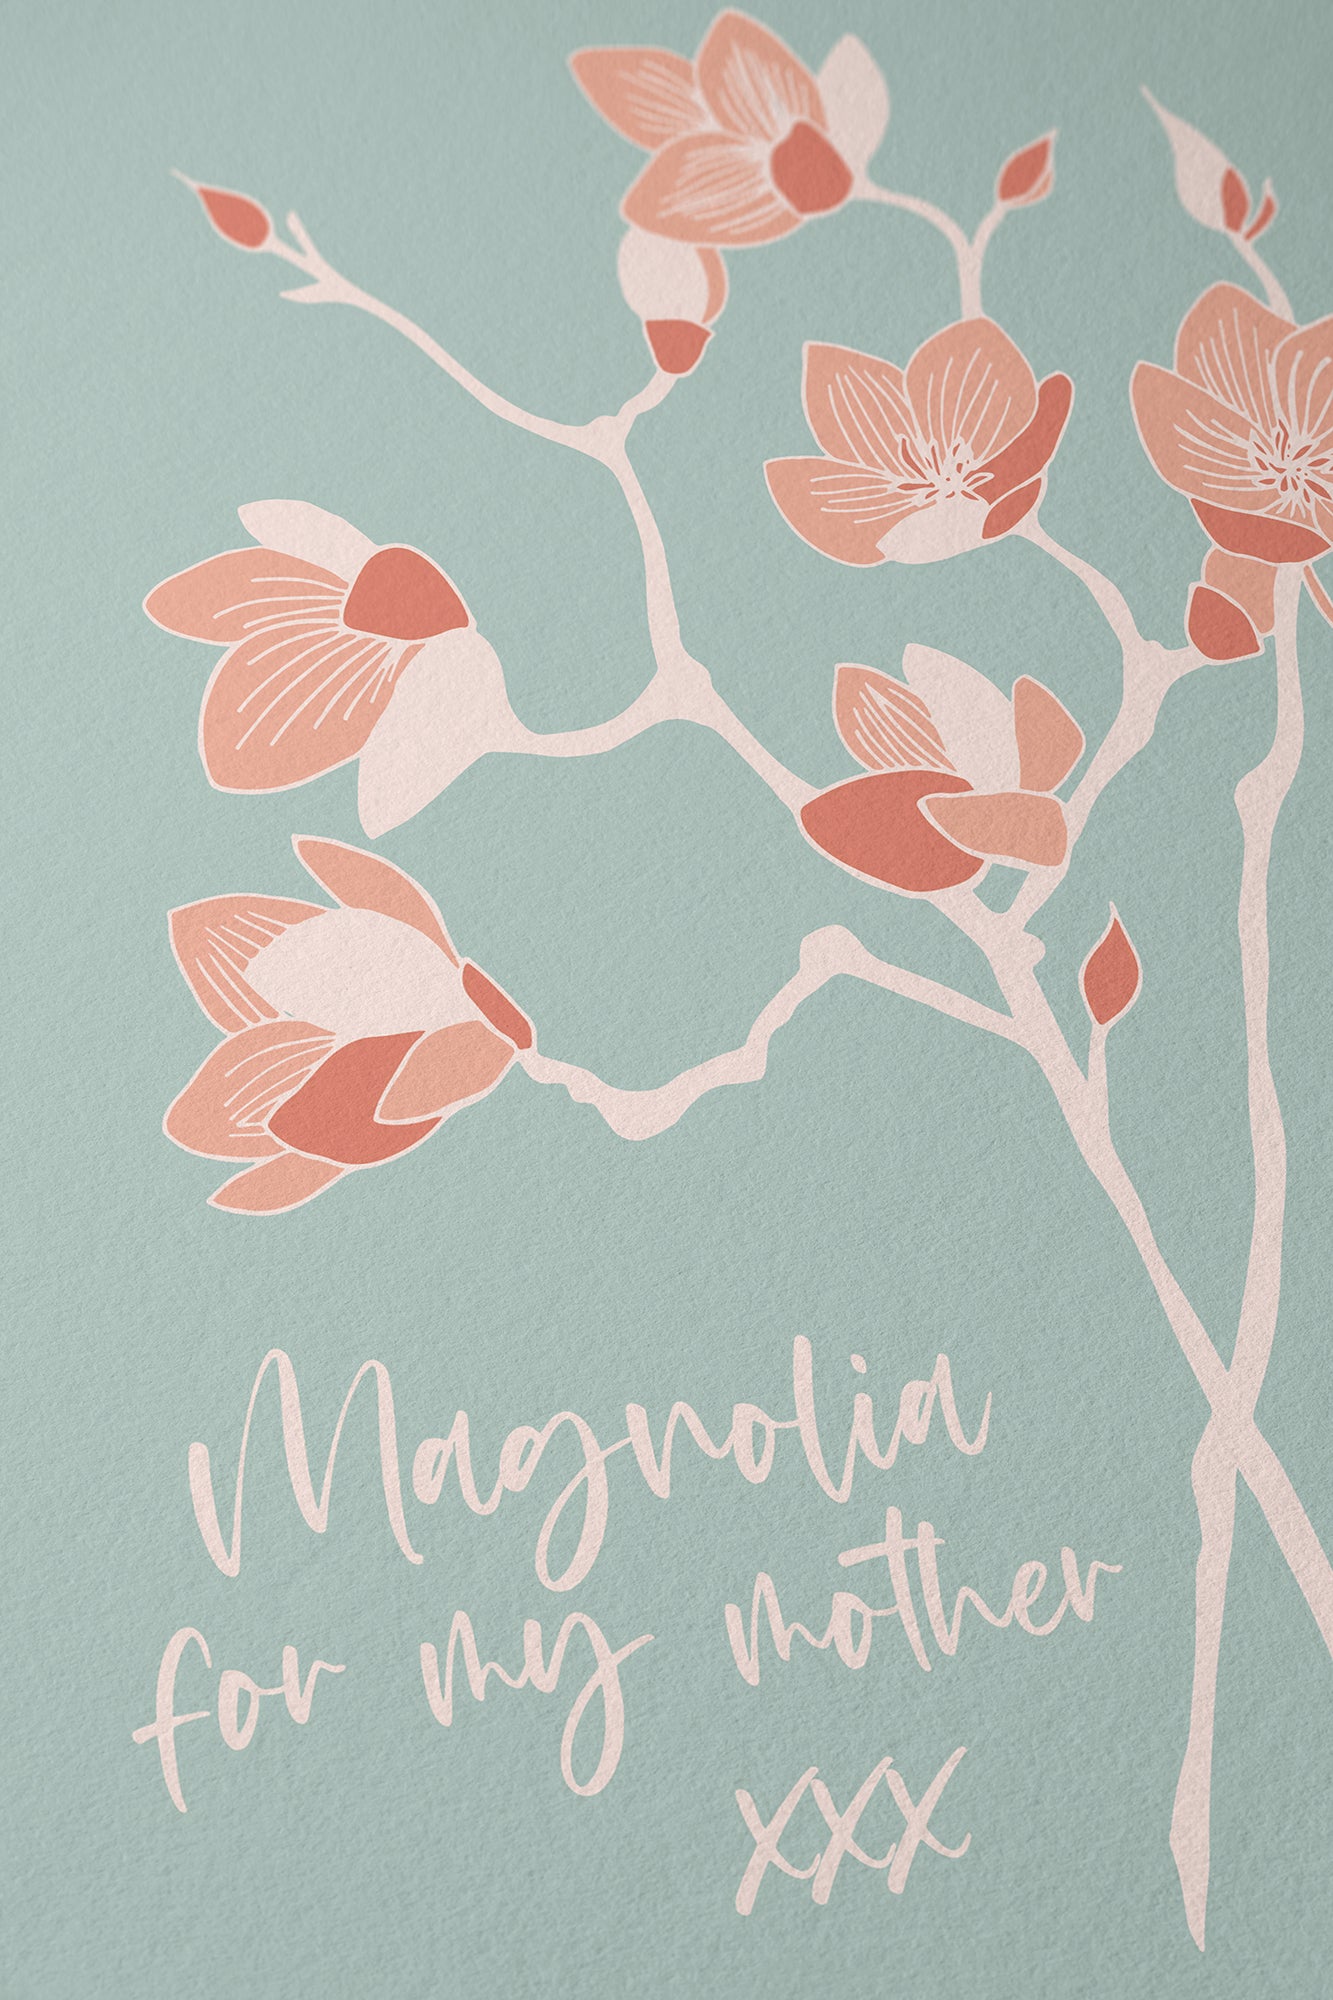 Magnolia for my Mother floral illustration - Mint Green/Pink - A4